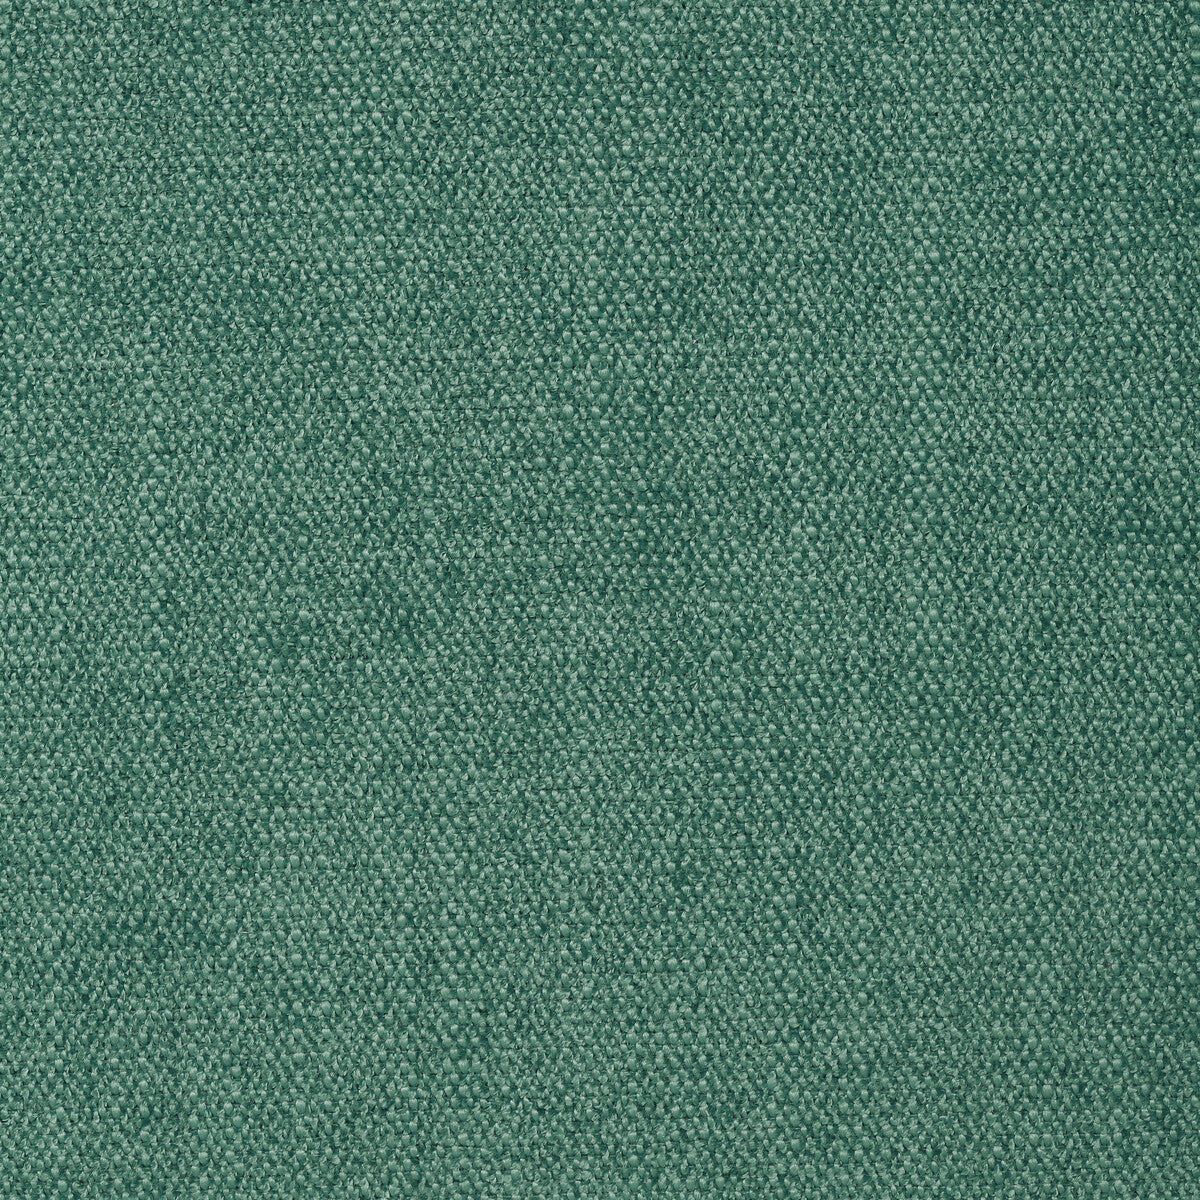 Kravet Contract fabric in 35114-35 color - pattern 35114.35.0 - by Kravet Contract in the Crypton Incase collection